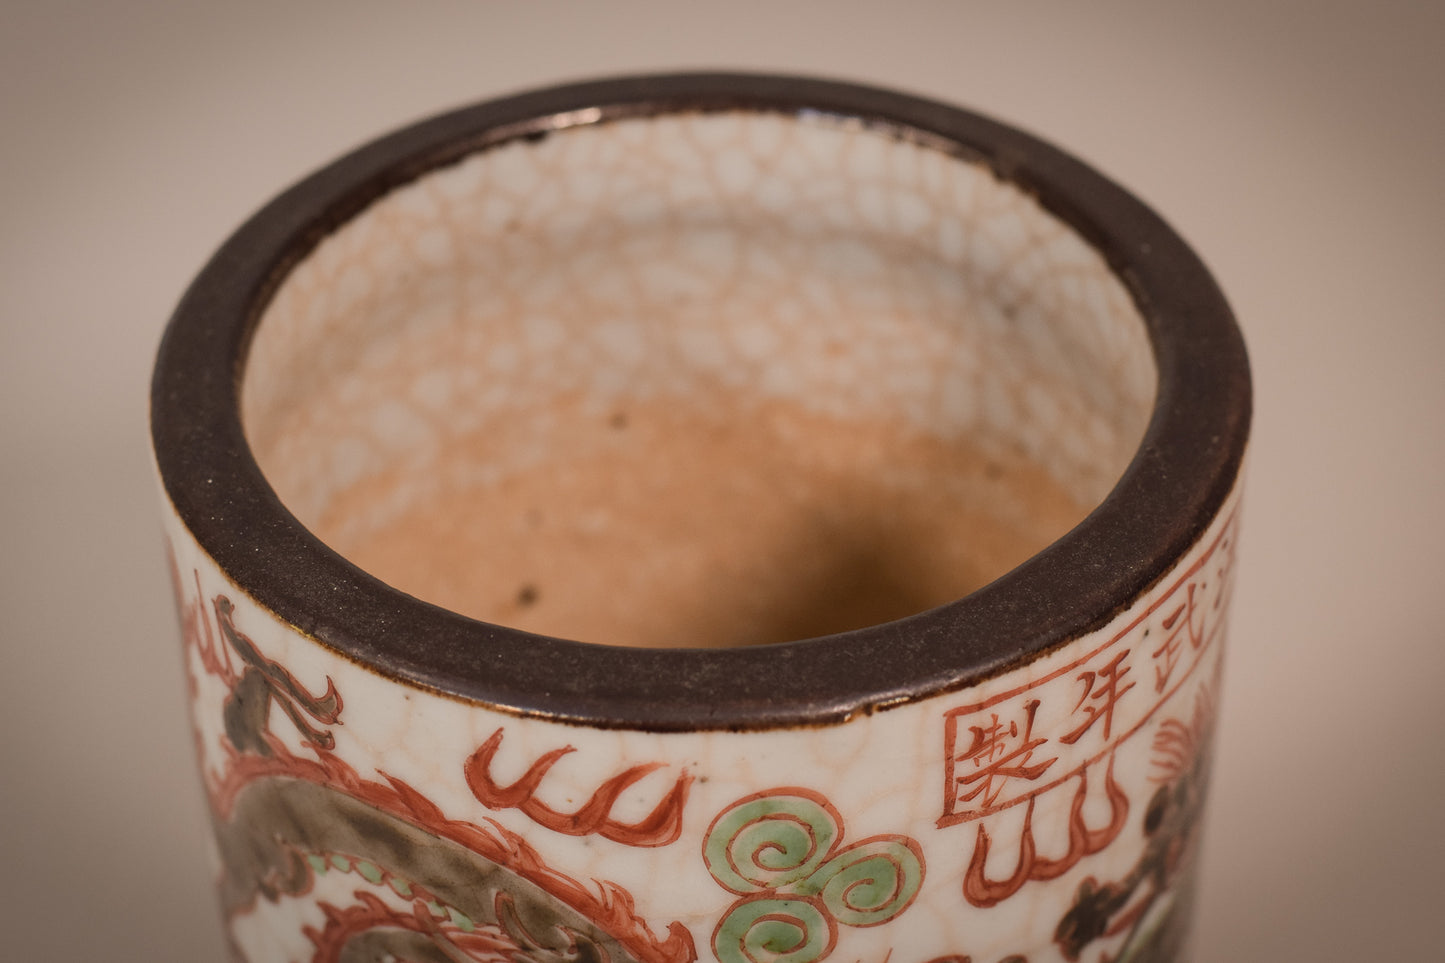 Crackle Ware Signed Chinese Brush Pot